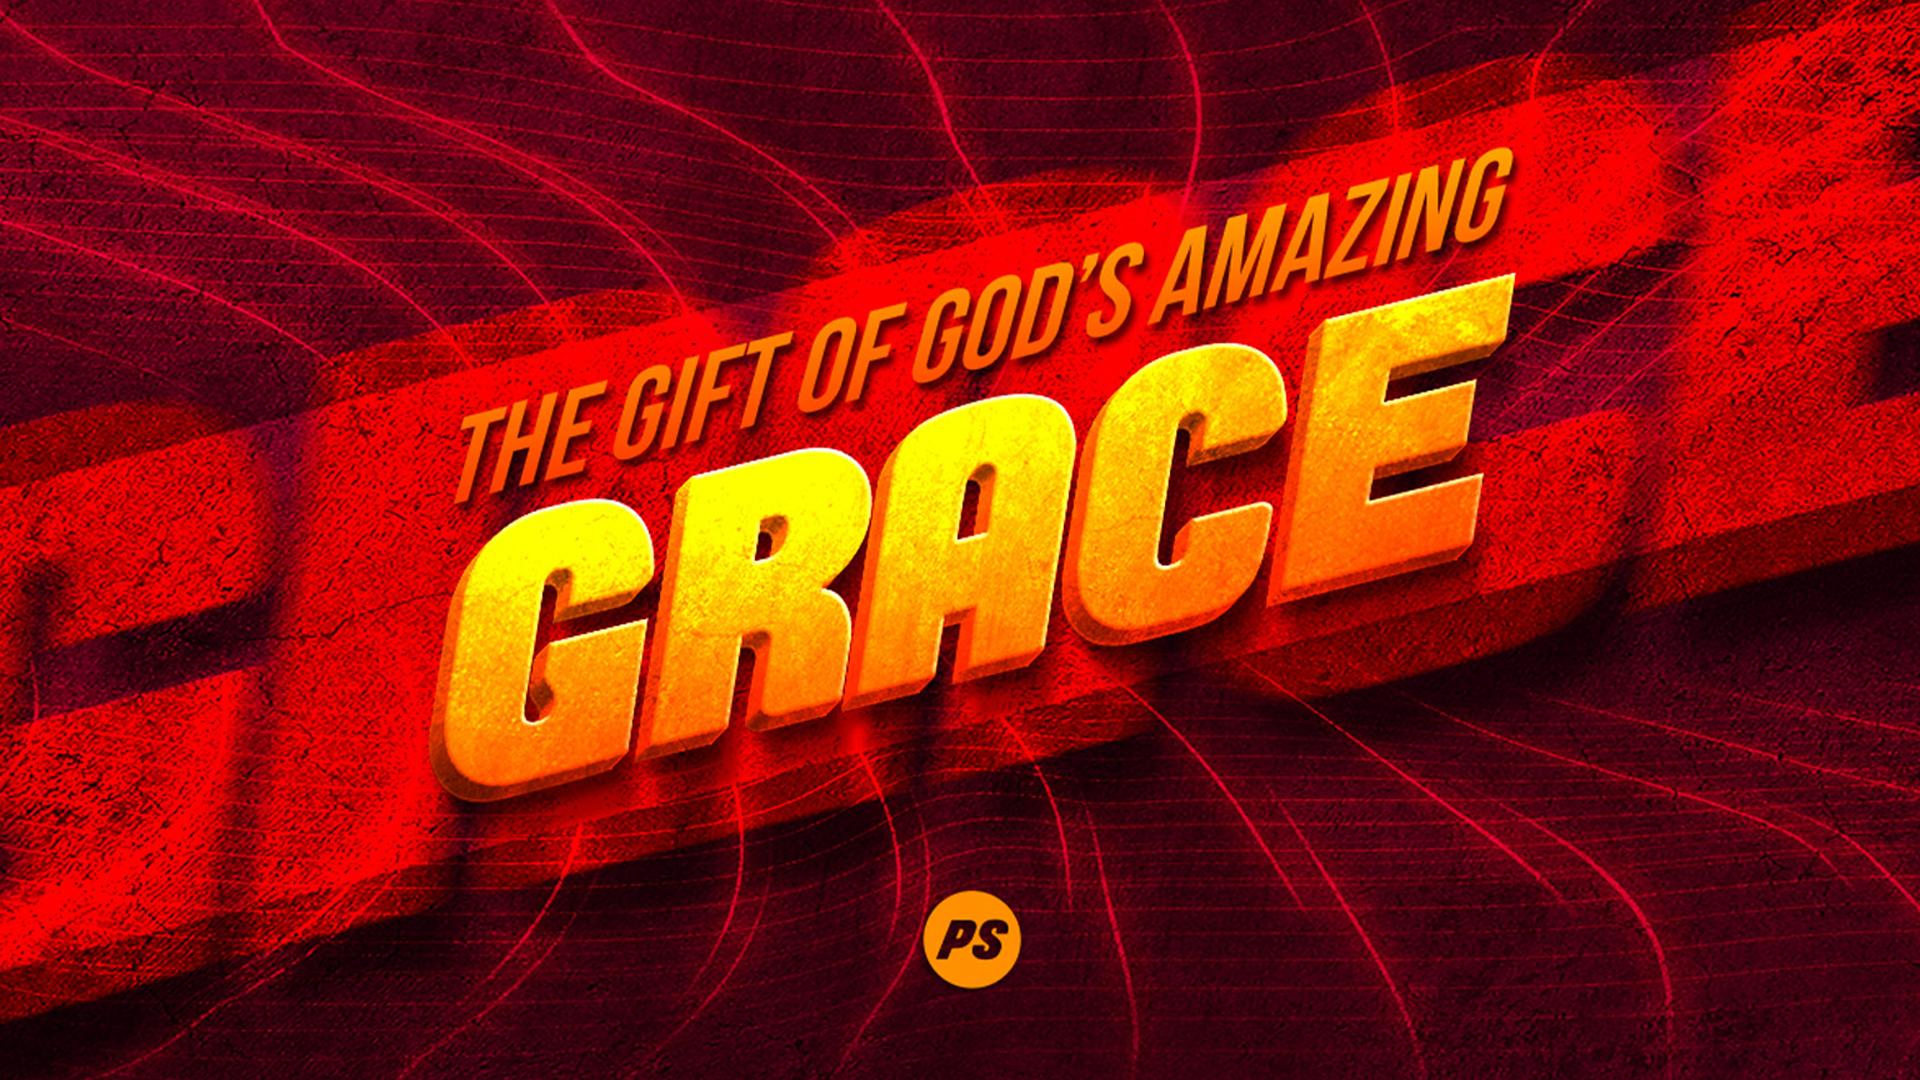 Featured Image for “The Gift of God’s Amazing Grace”